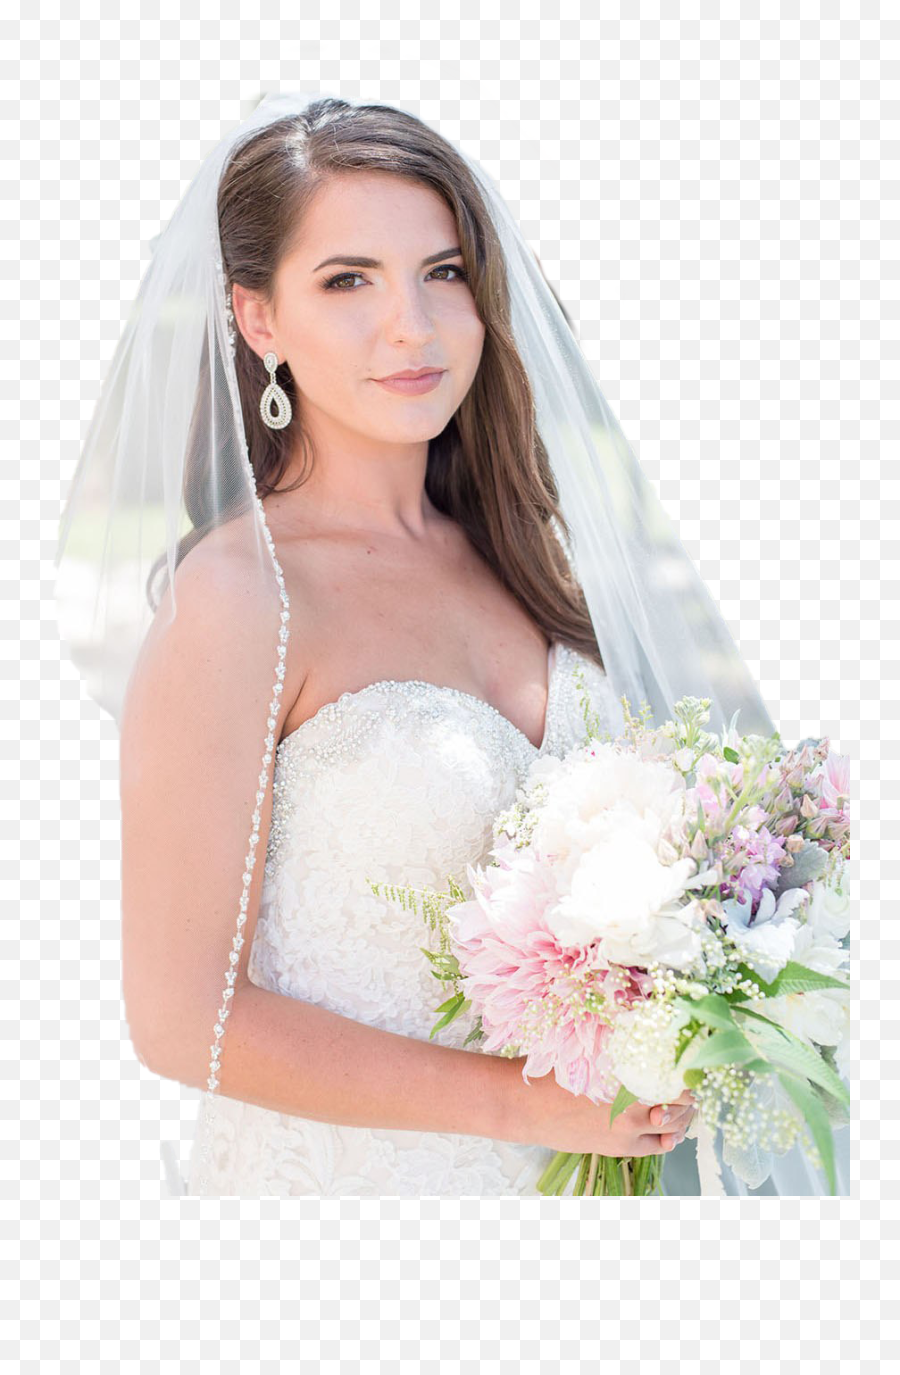 Bride Png High Quality Image All - Bride Png,Veil Png